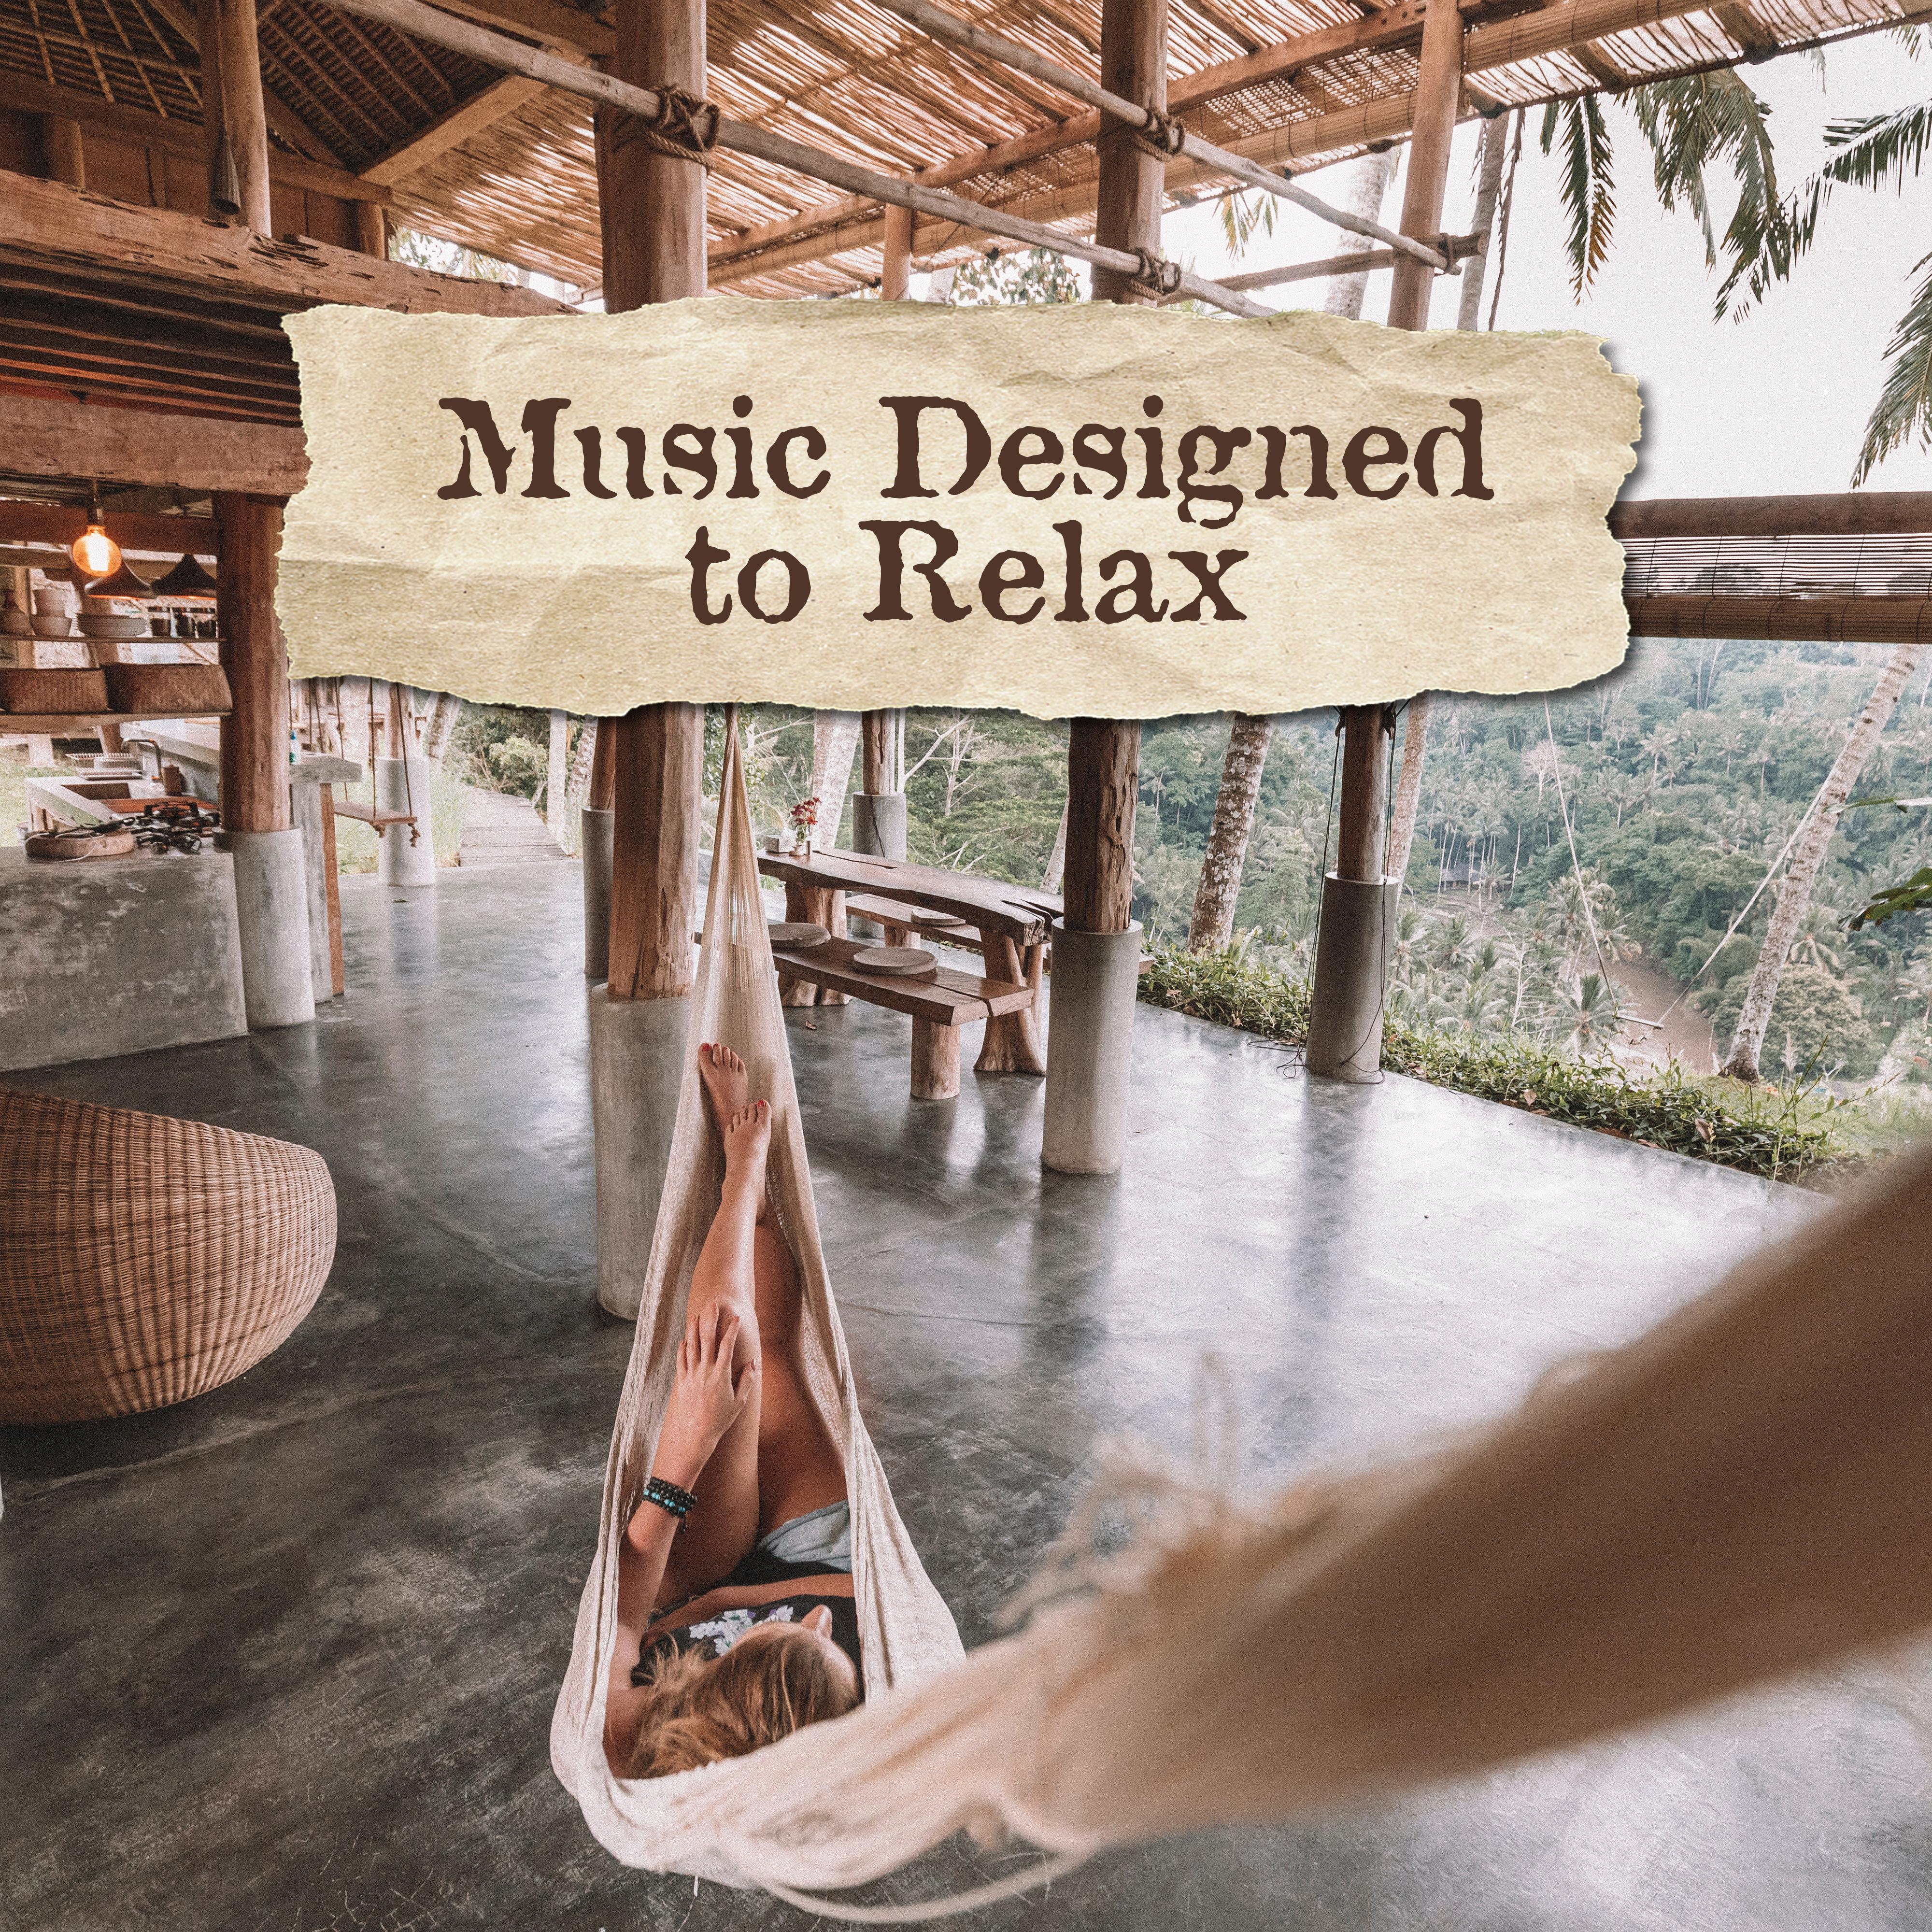 Music Designed to Relax